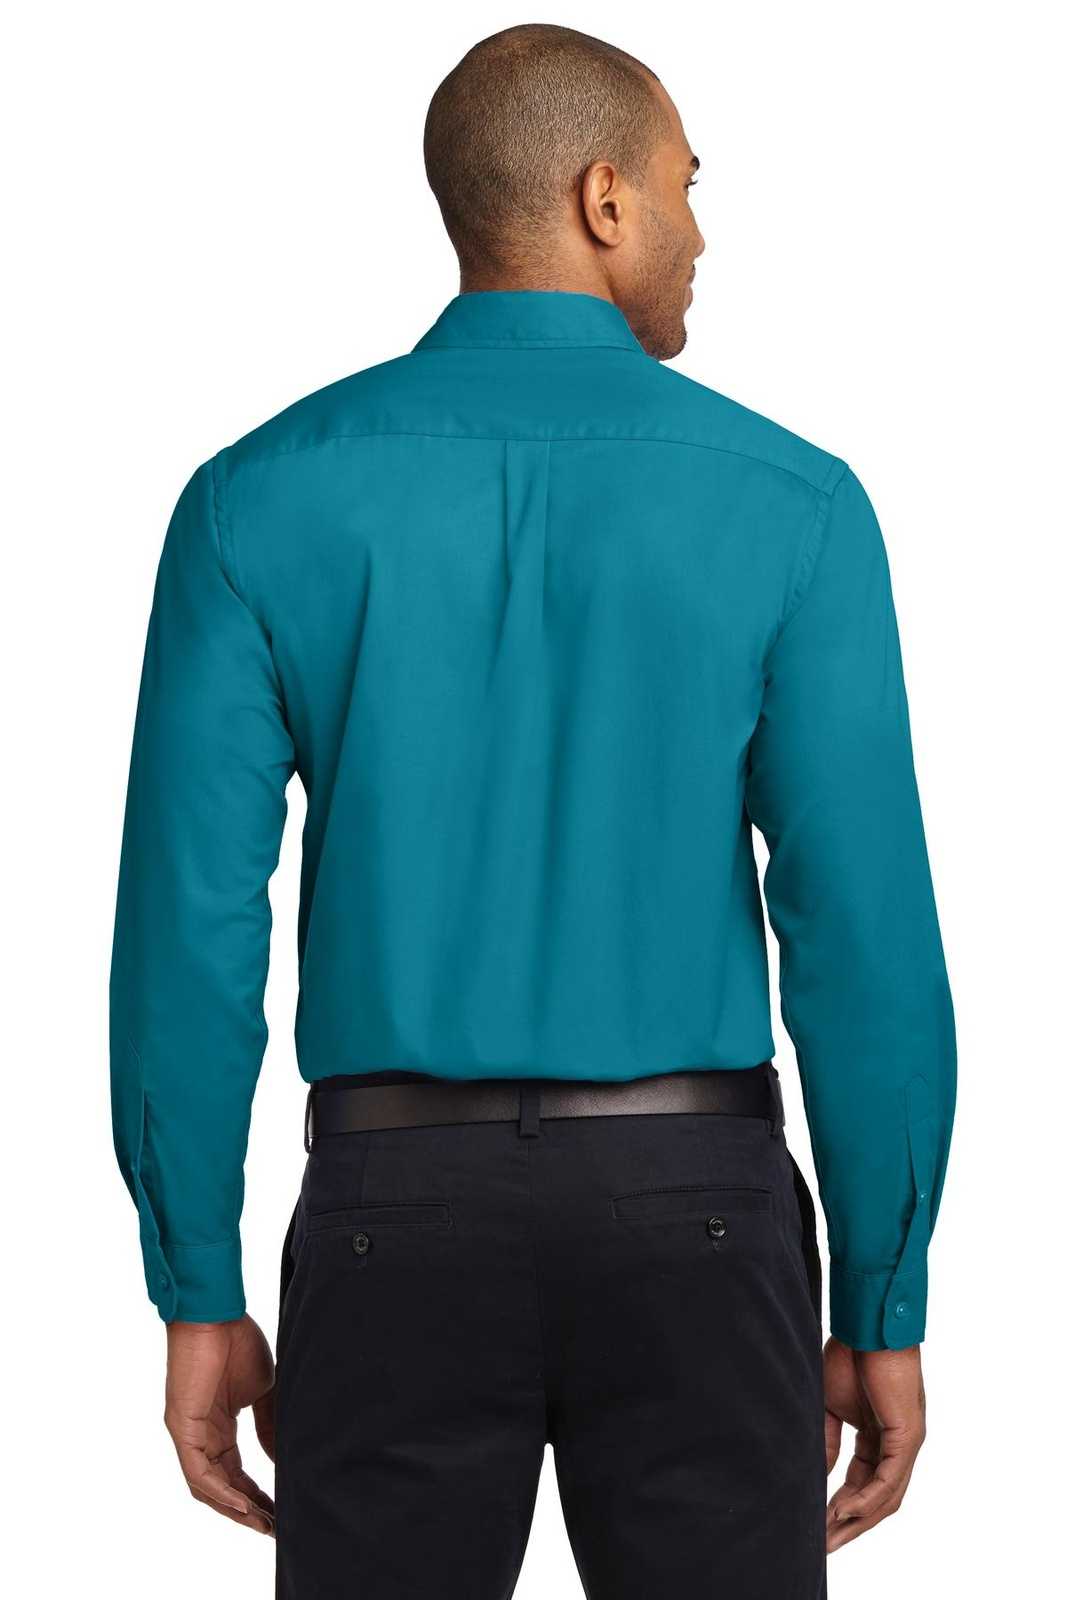 Port Authority S608 Long Sleeve Easy Care Shirt - Teal Green - HIT a Double - 1